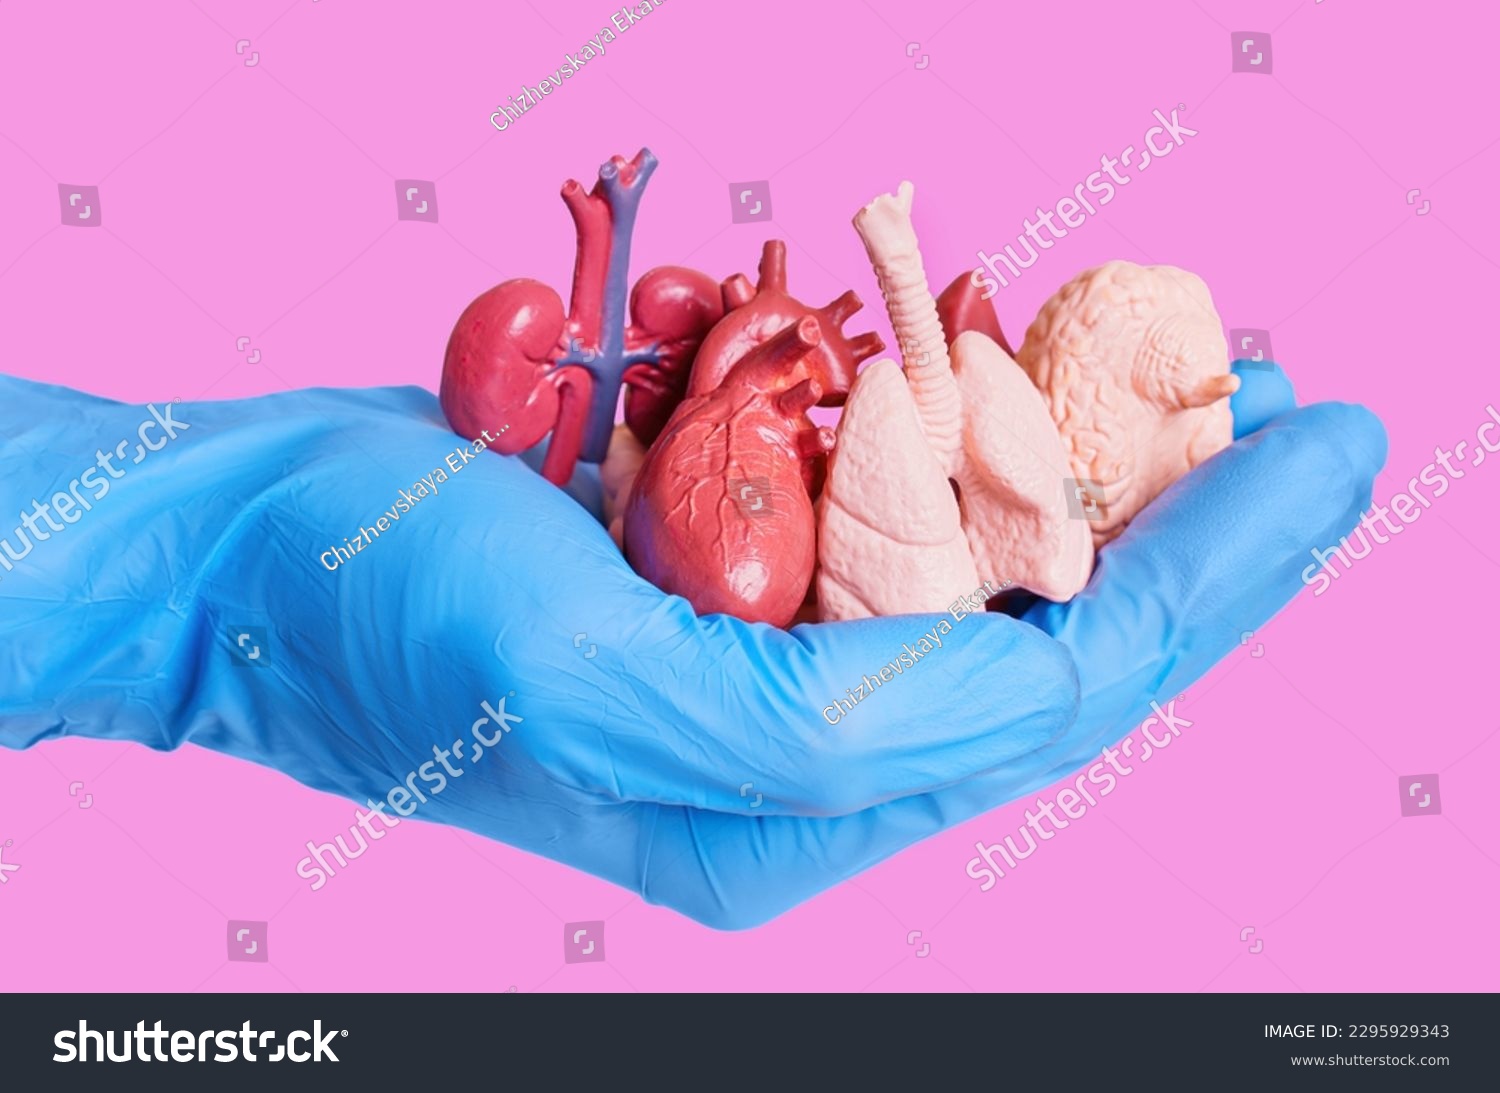 Hand in a blue surgical glove holding miniature anatomical models of human organs isolated on pink. Organs donation related concept. #2295929343